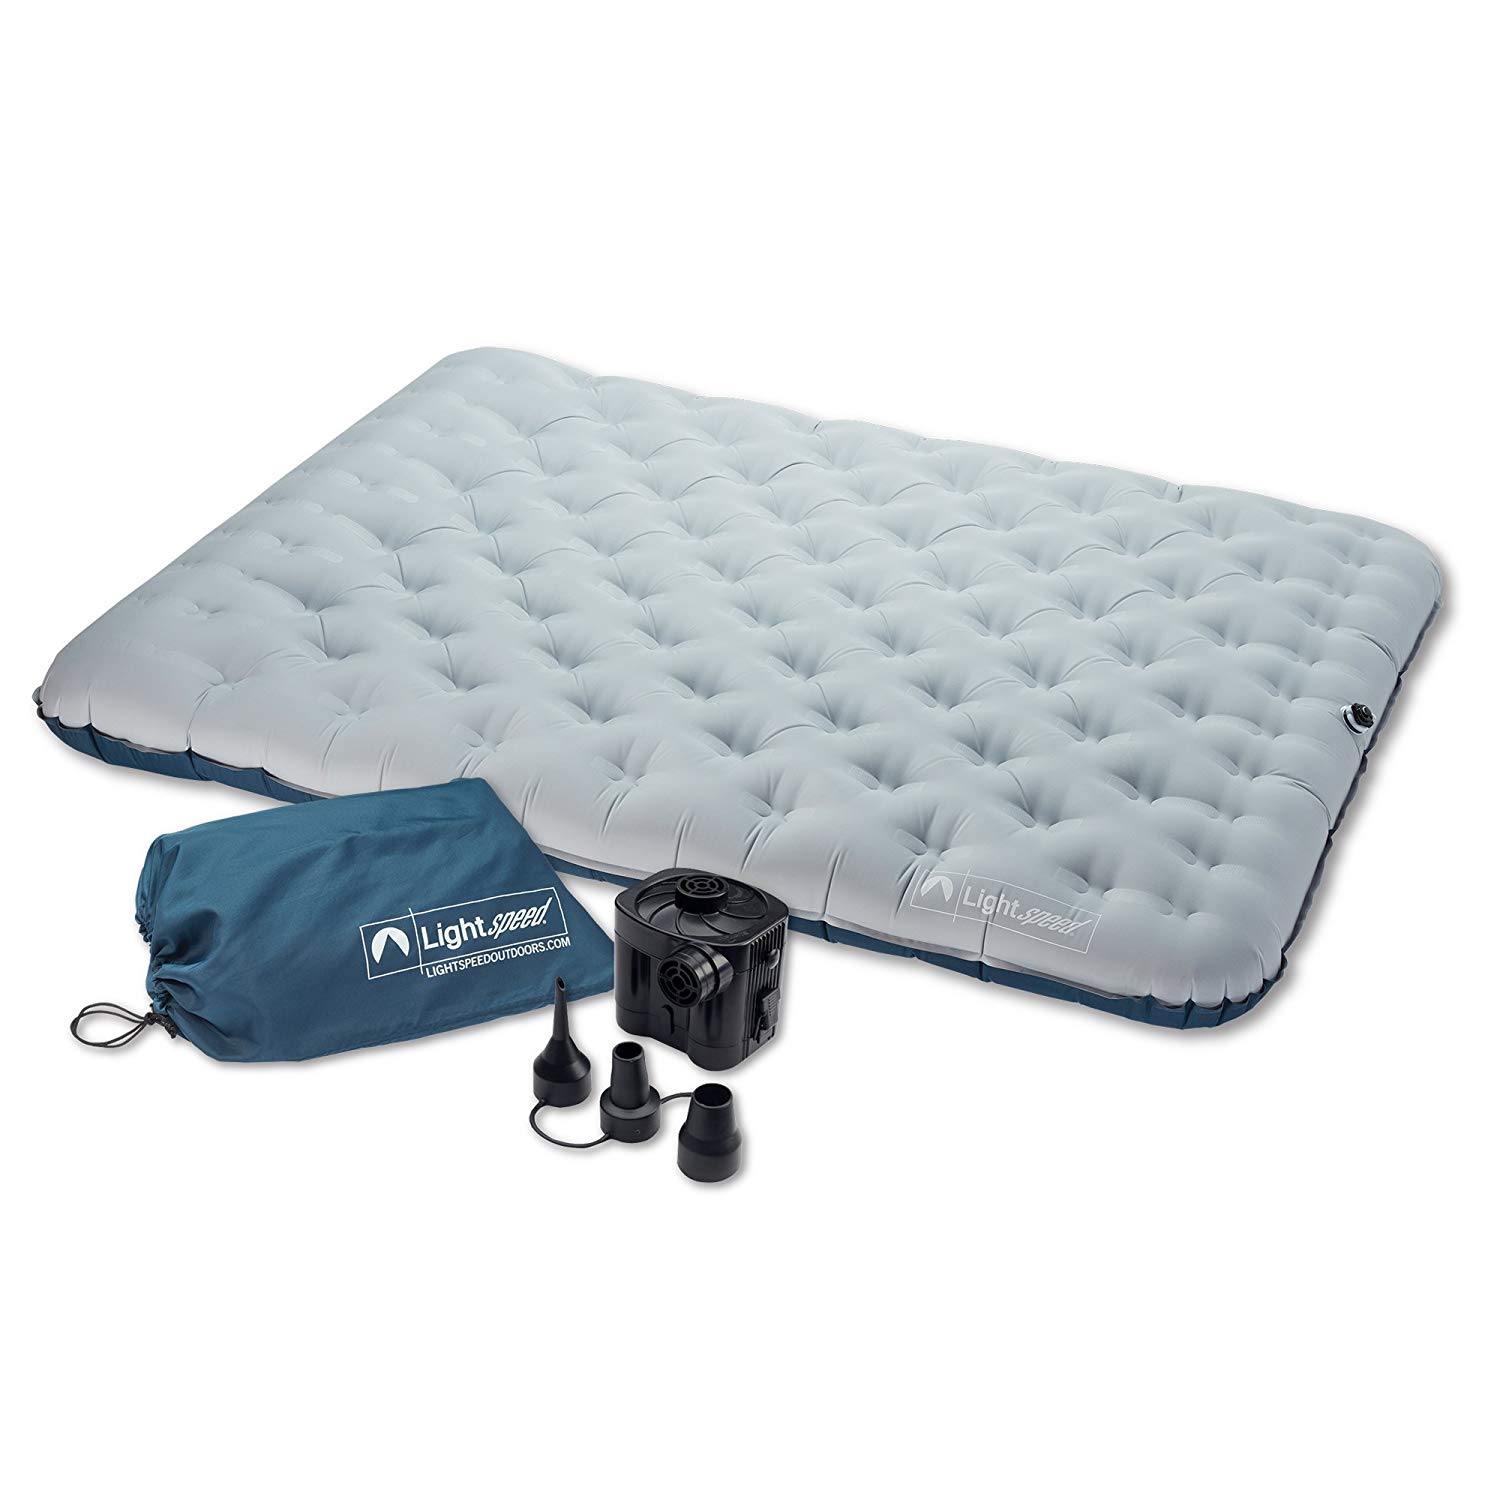 5 Best Portable Air Mattresses for Camping 2019 - Best ...